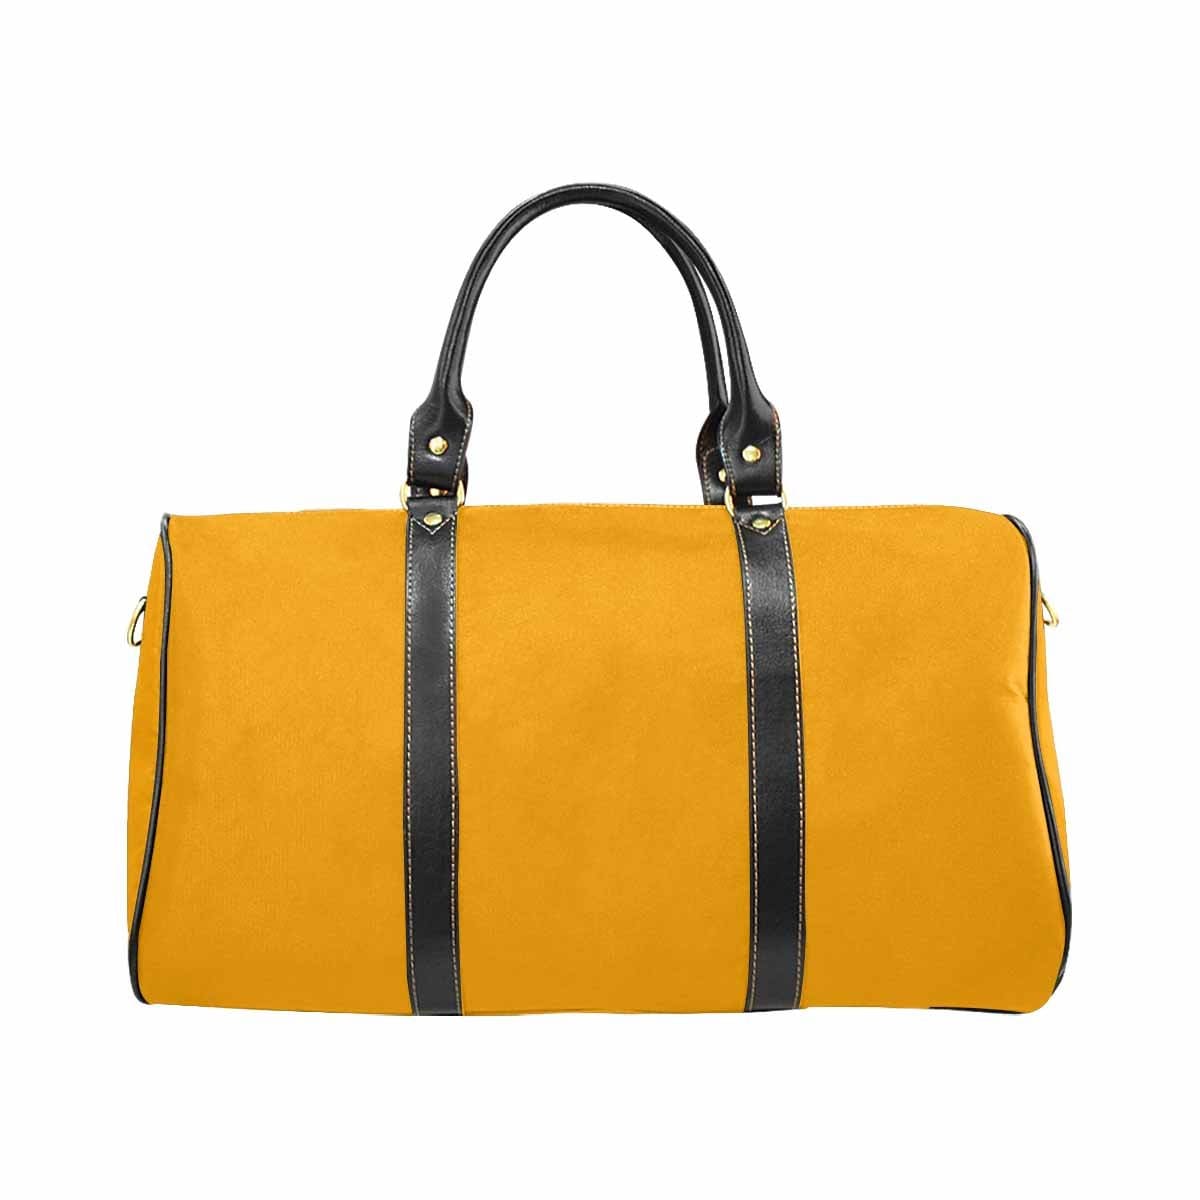 Travel Bag Leather Carry On Large Luggage Bag Bright Orange - Bags | Travel Bags